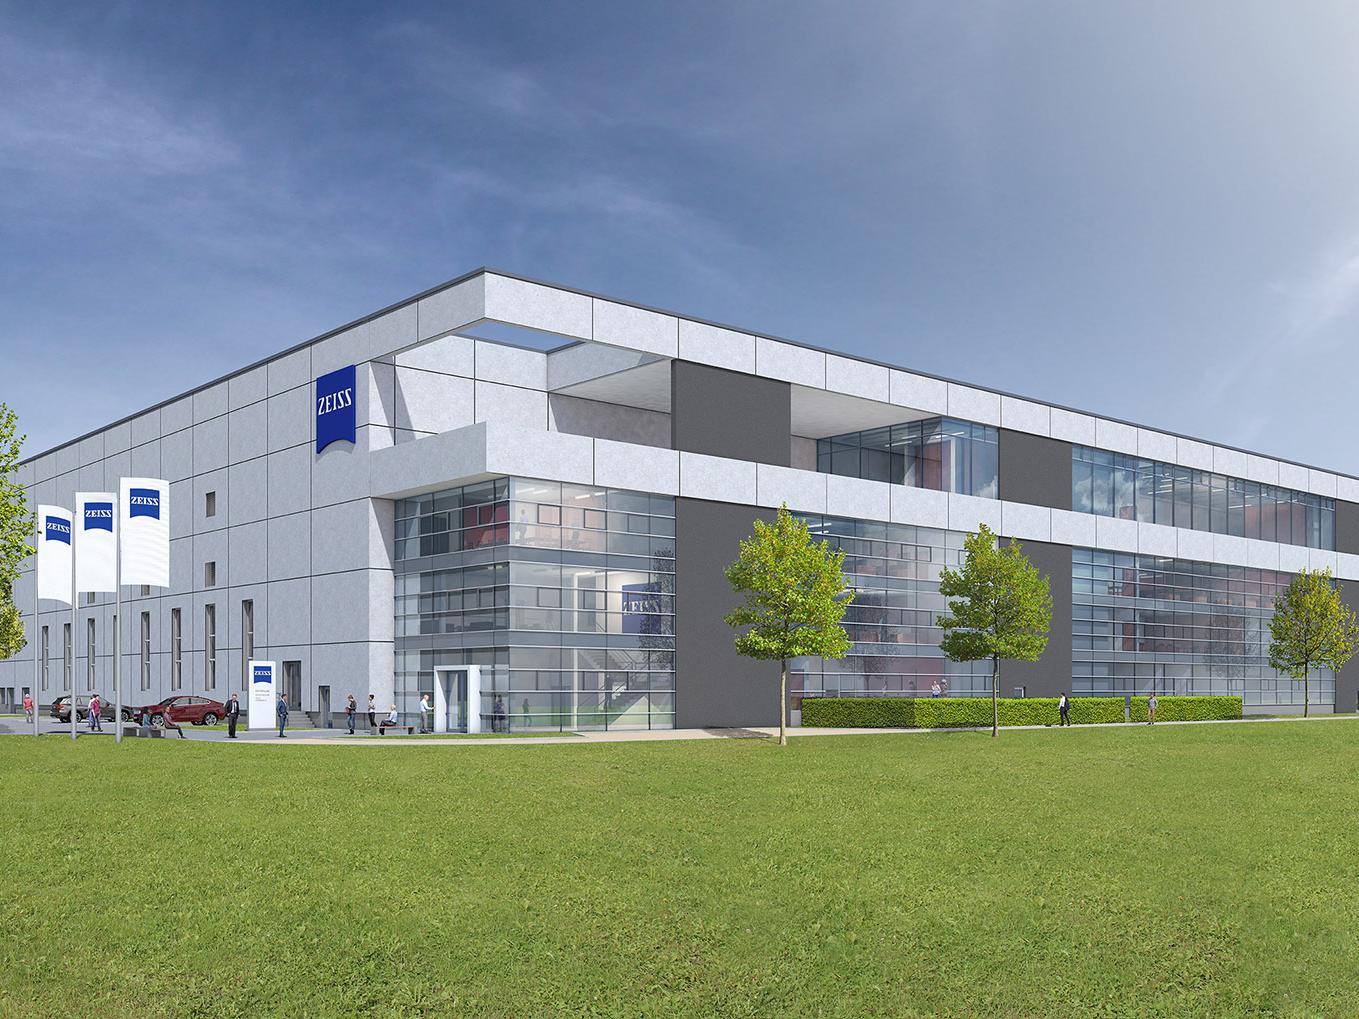 Visualization design of the new multifunctional factory with areas for optics, coating and assembly. The new ZEISS SMT factory building in the Dillfeld district of Wetzlar will accommodate around 150 employees in a production area of over 12,000 m².